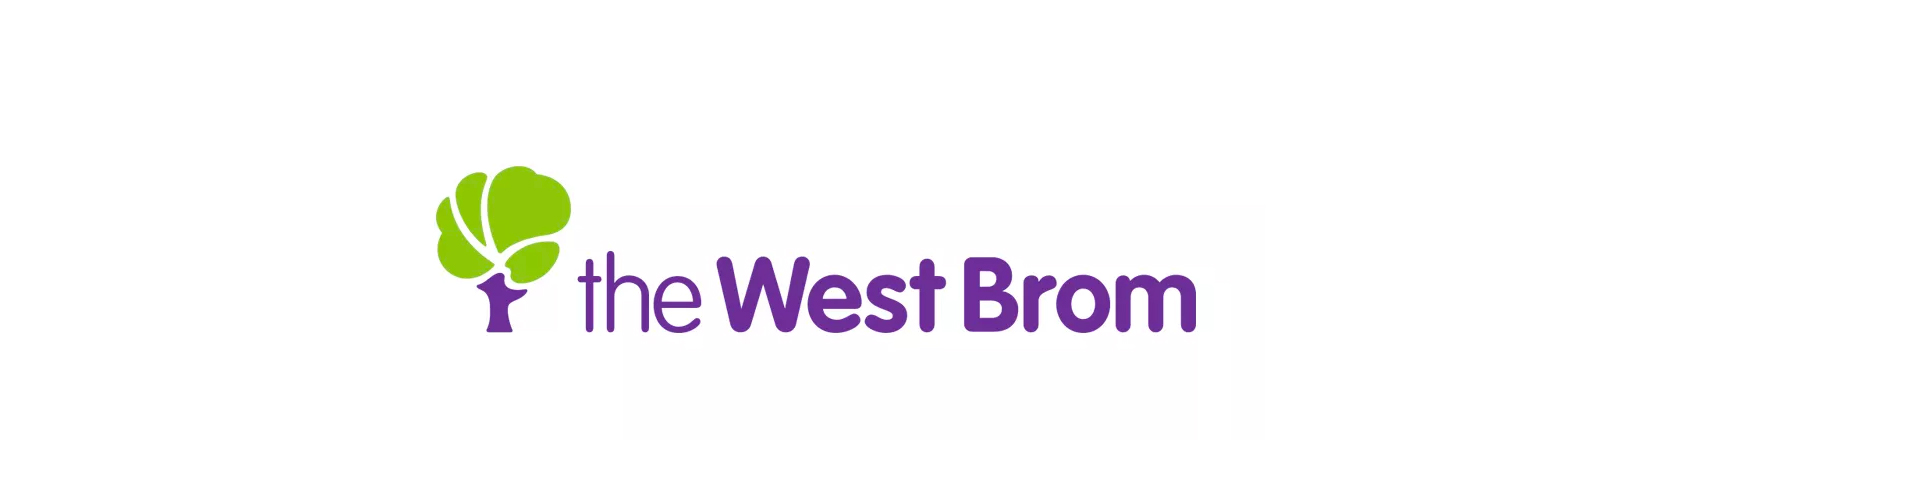 Hood Group enters TPA relationship with West Brom